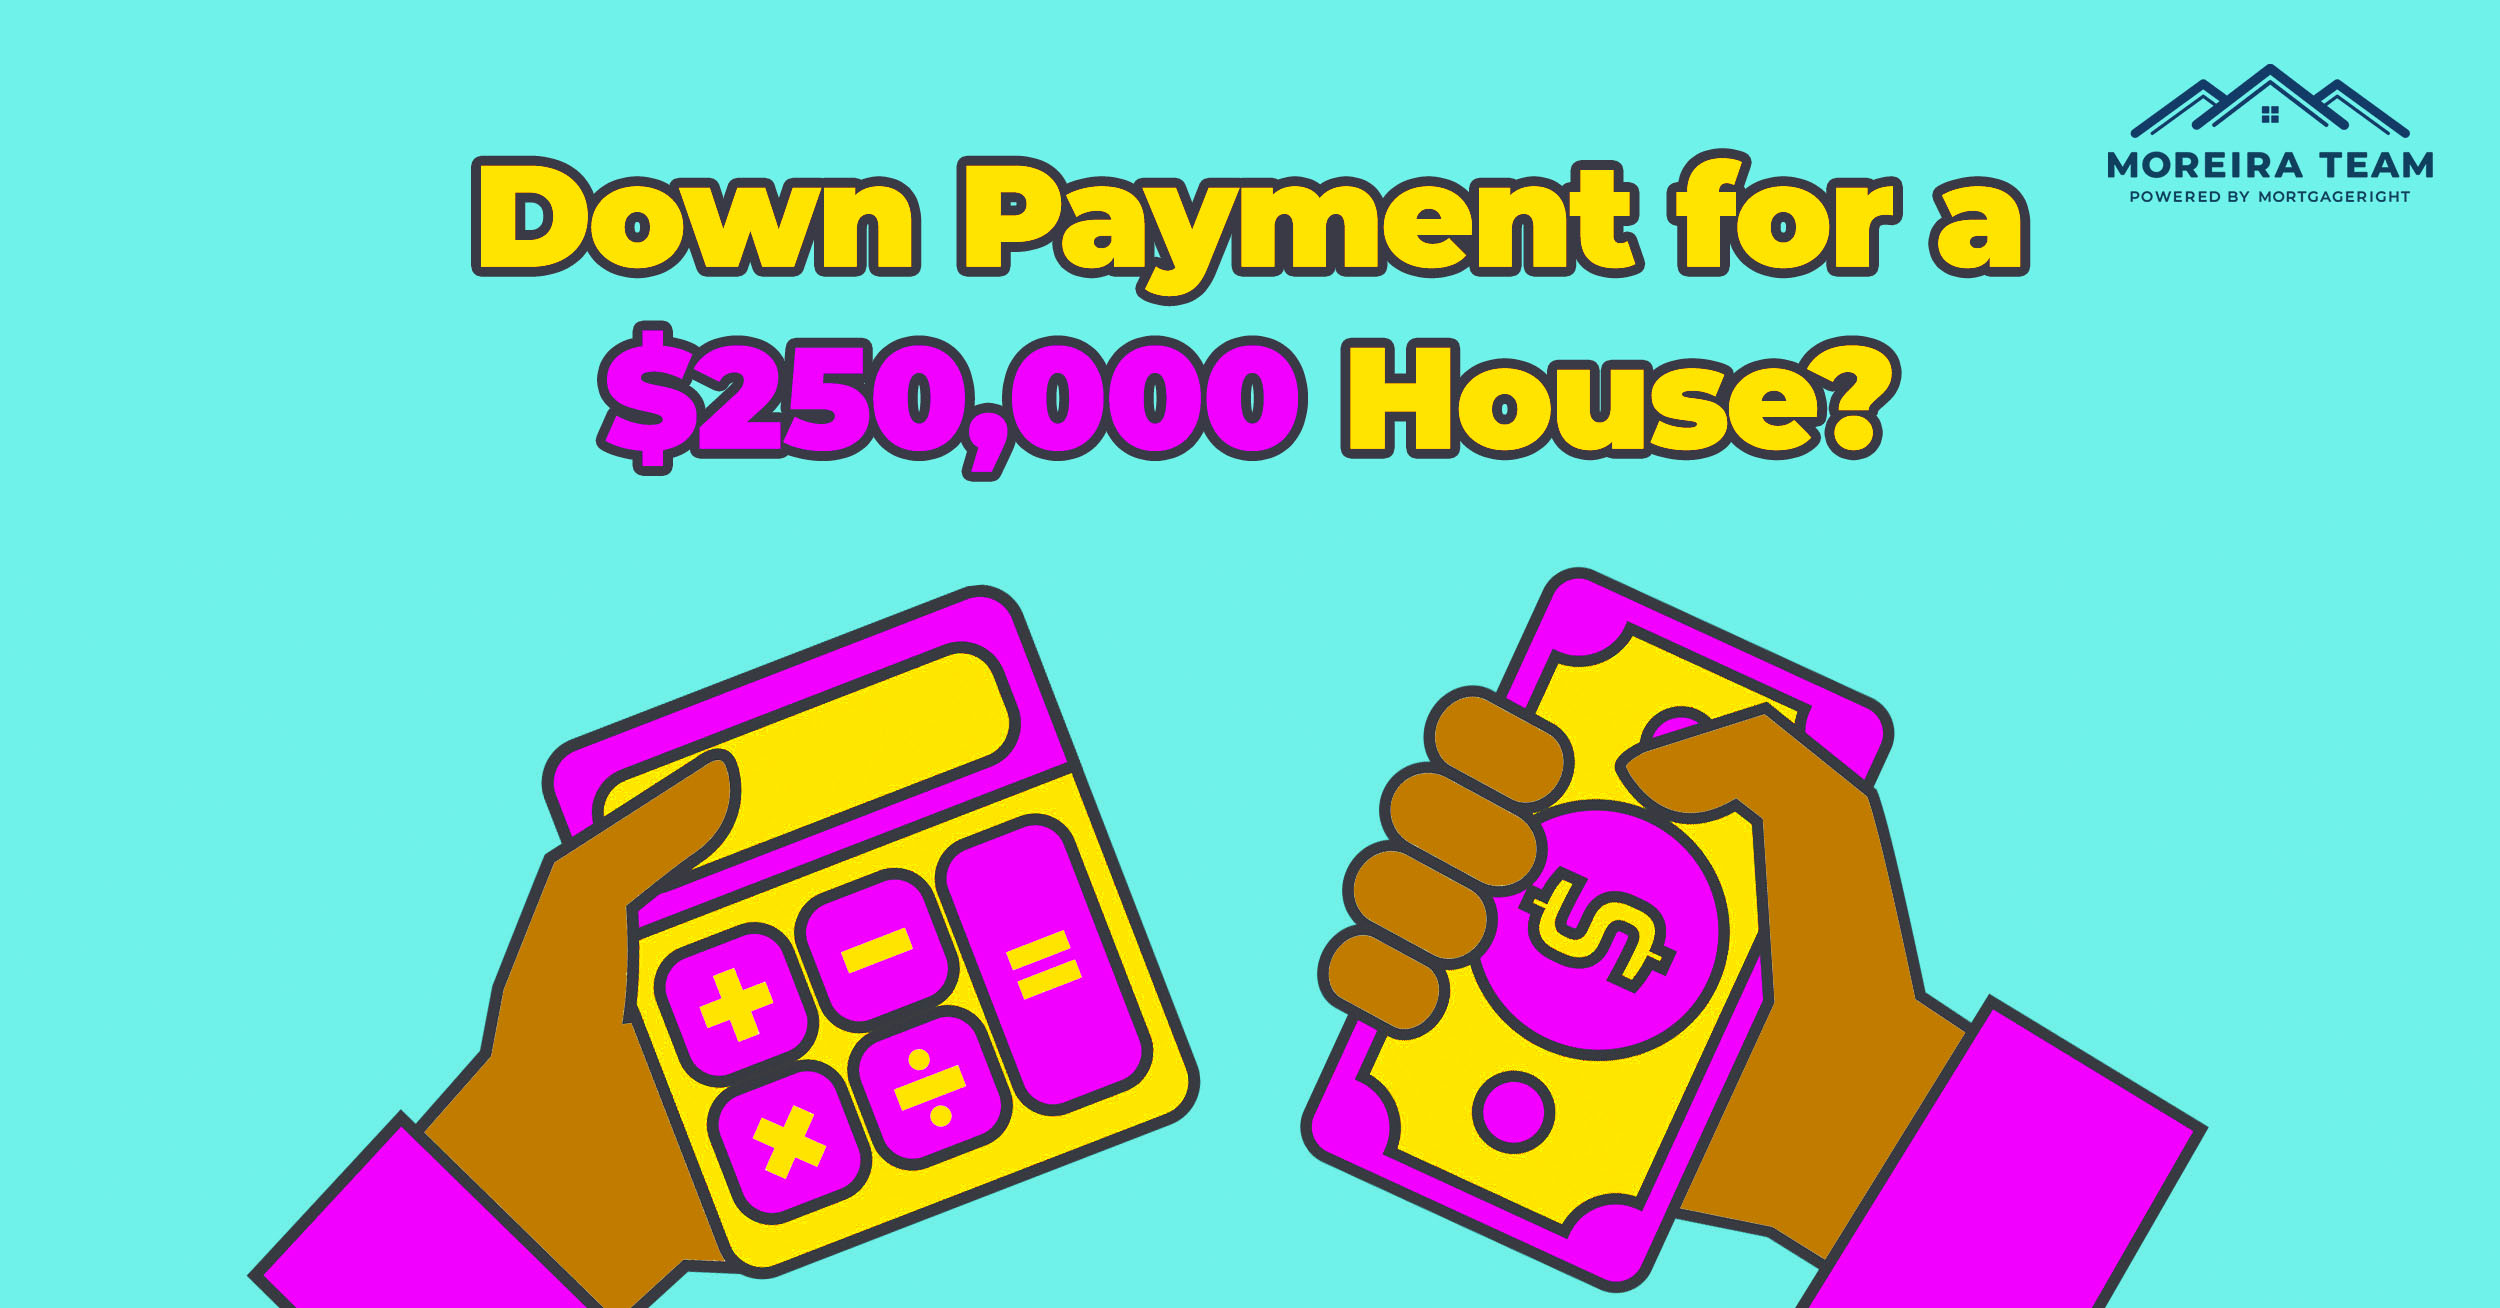 What is the Down Payment on a $250,000 Home?